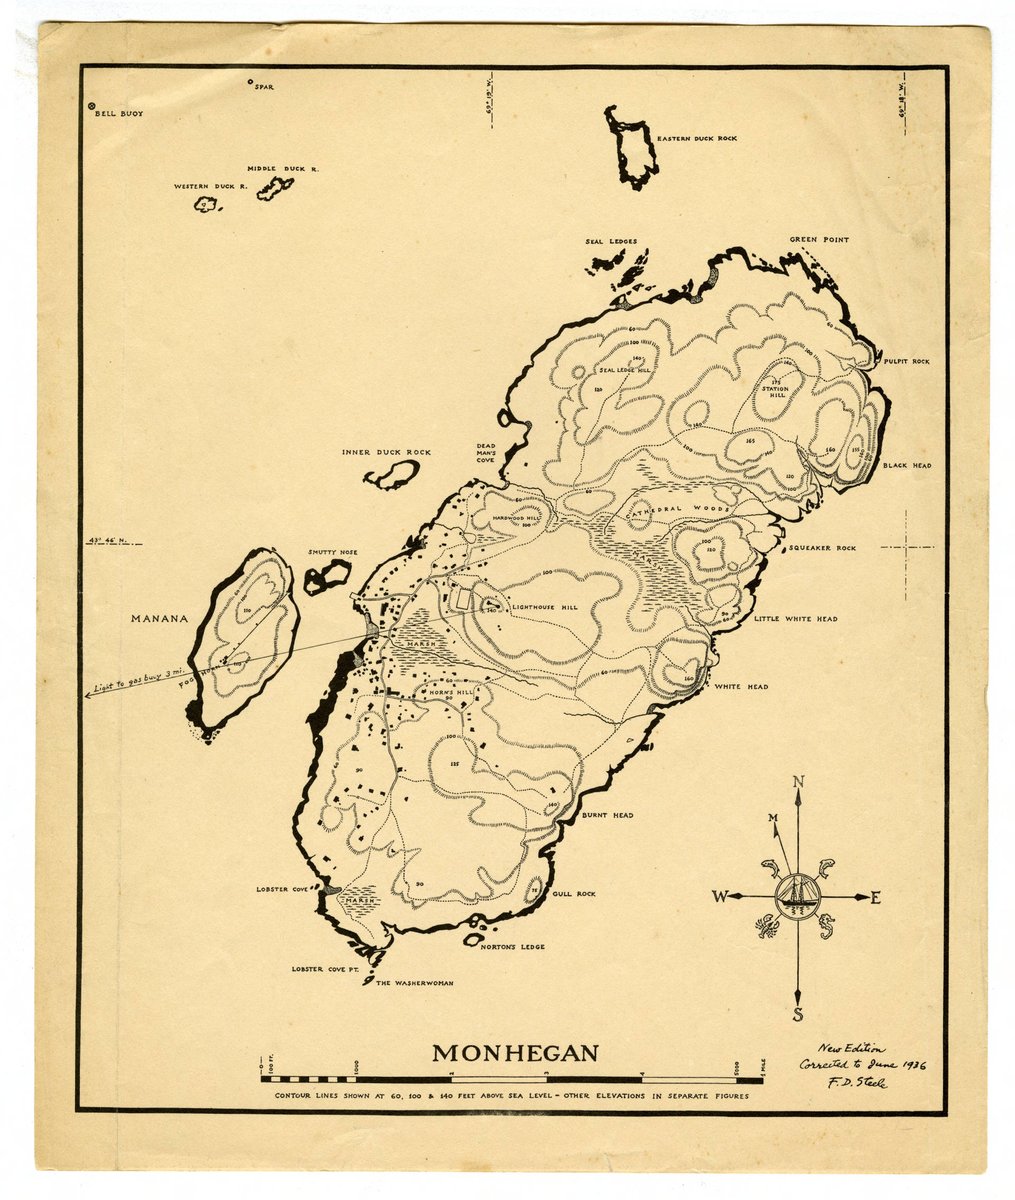 The Steele family spent quite a bit of time on Monhegan Island & still has a close association w/ this place, as evident in this map  @SherlockUMN  @umnlib, corrected by FDS & dated June 1936. The artist colony here was established in the mid-19th century.  http://purl.umn.edu/99522 